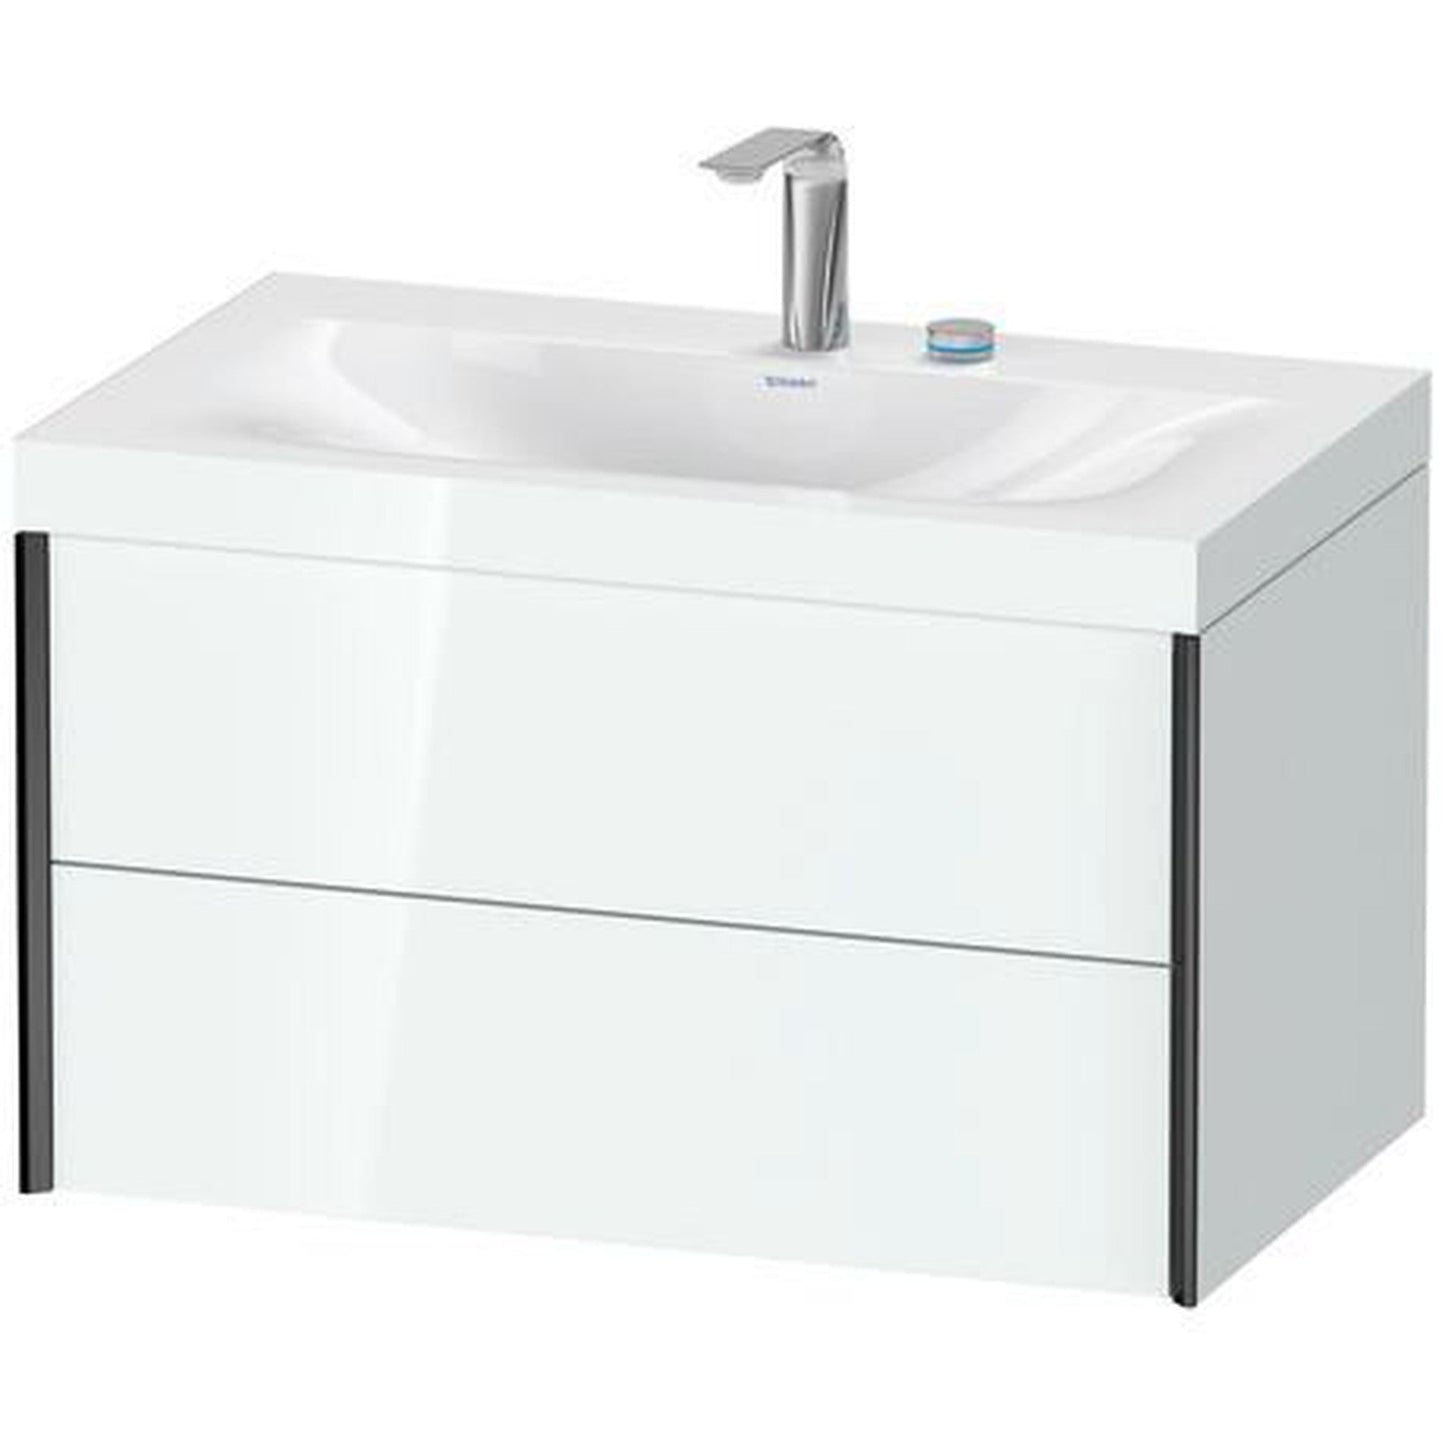 Duravit Xviu 31" x 20" x 19" Two Drawer C-Bonded Wall-Mount Vanity Kit With Two Tap Holes, White (XV4615EB285C)